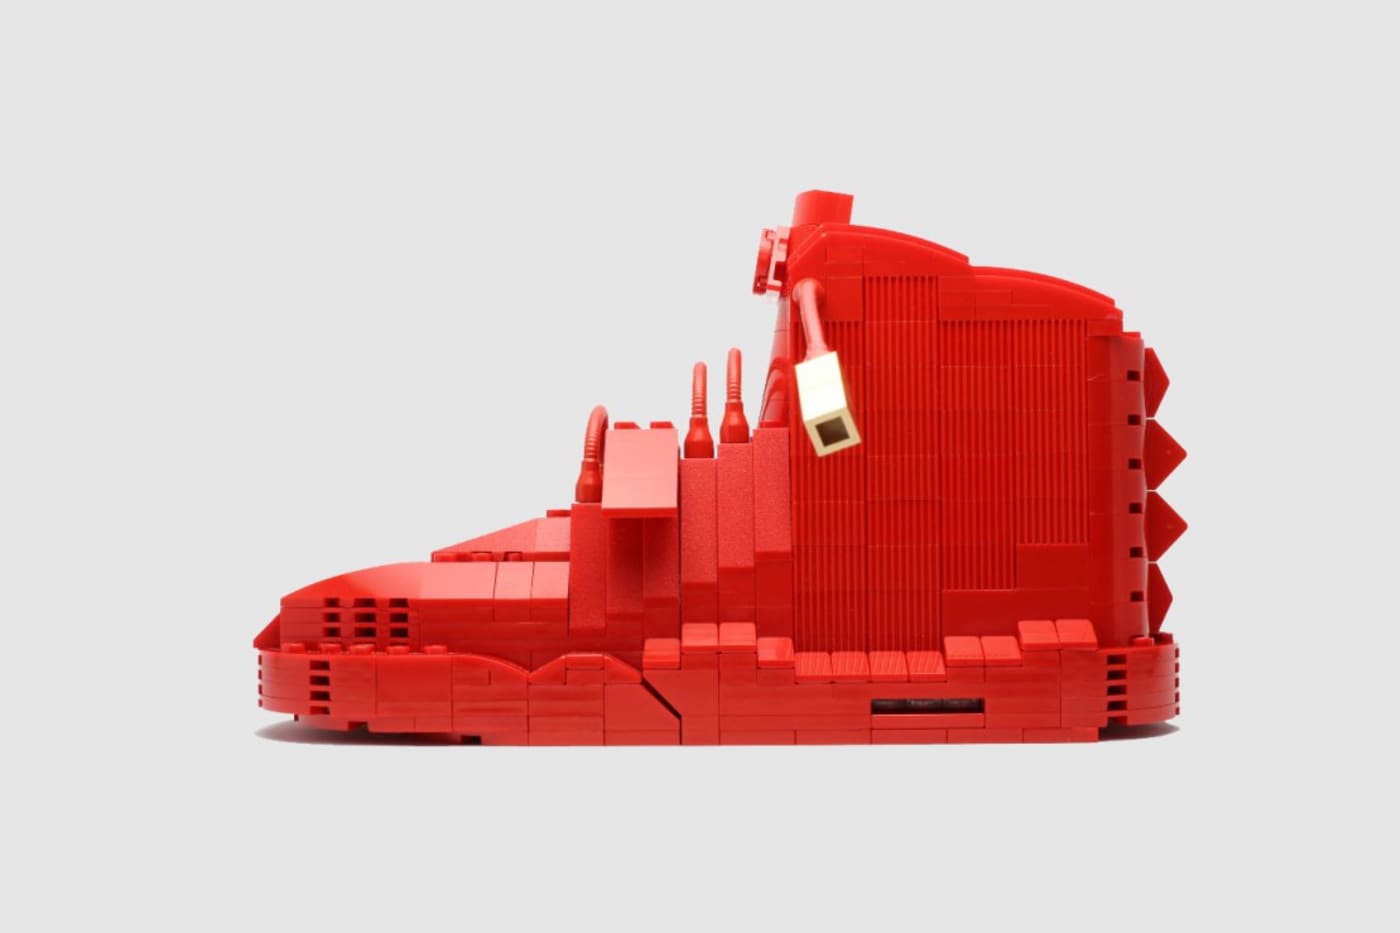 You Can Now Buy Your Very Own Tom Yoo Designed Lego Complex